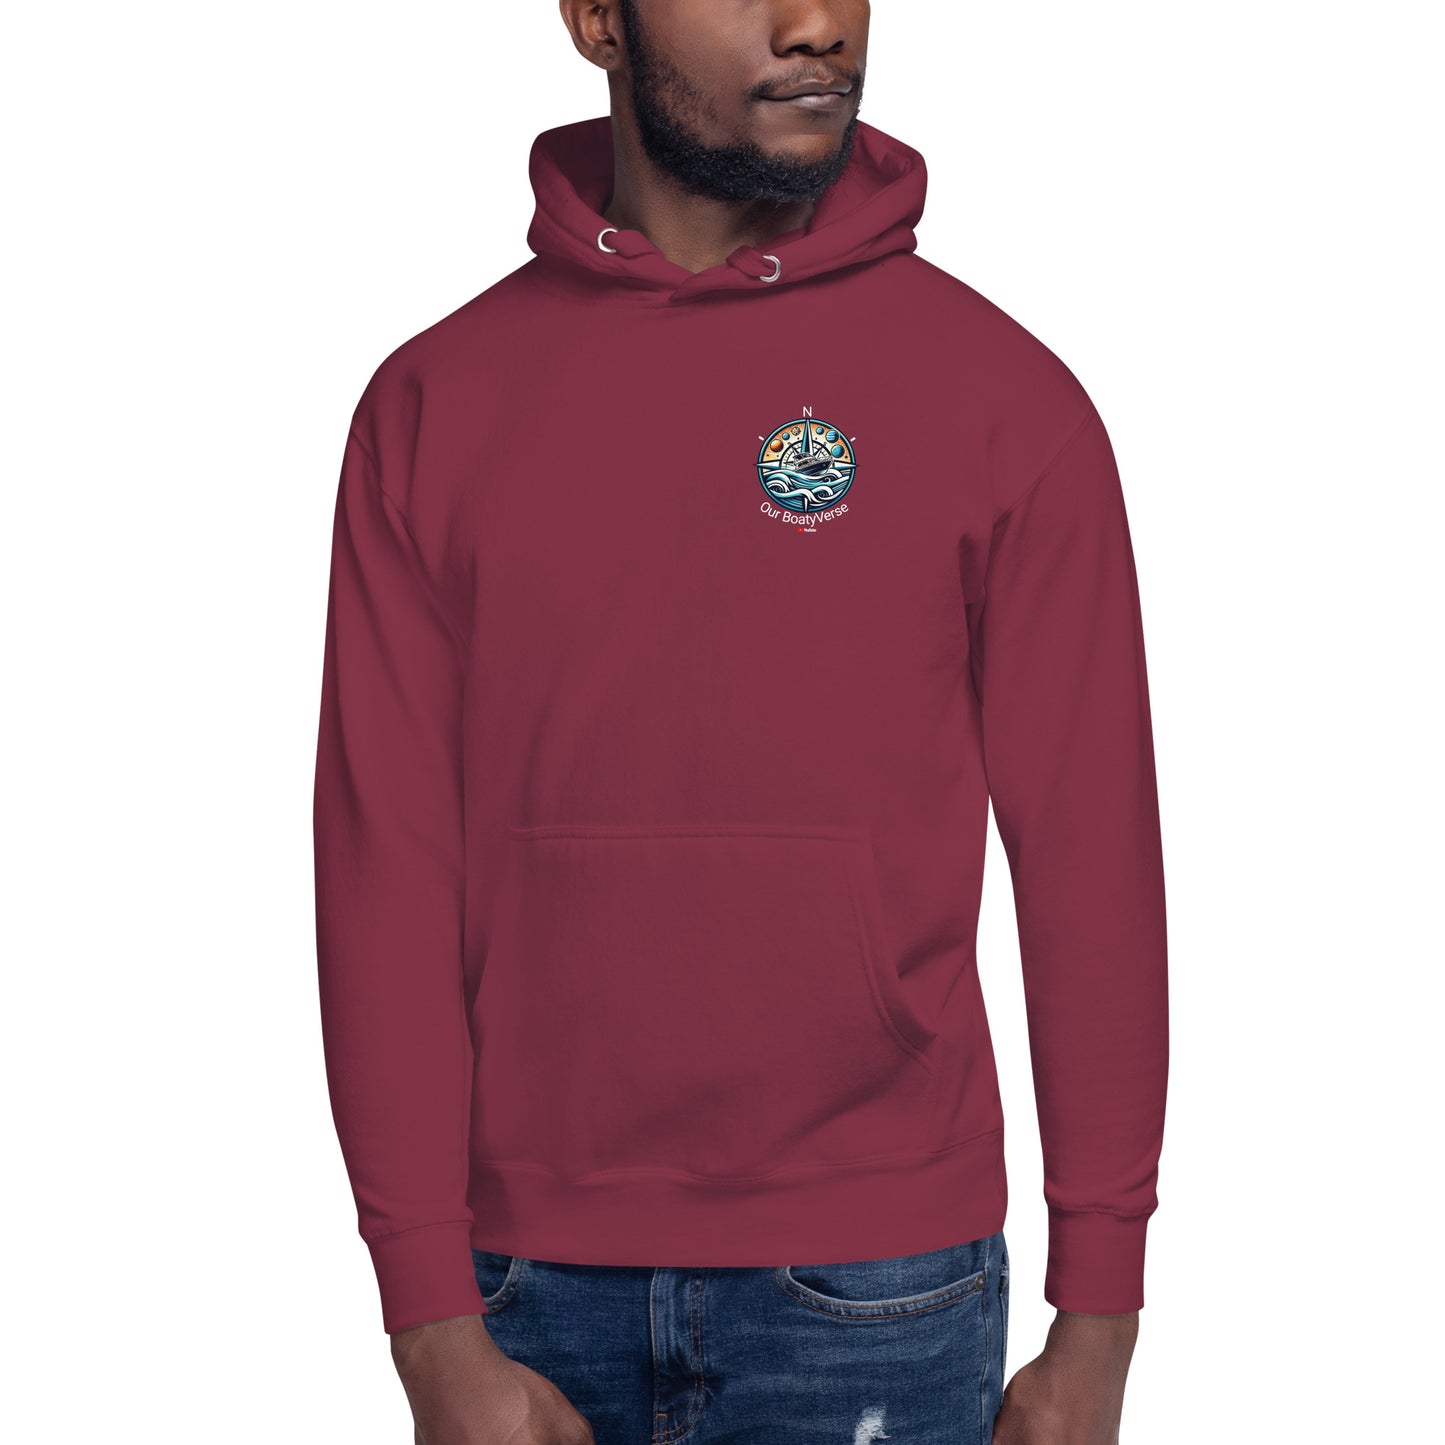 Streetwear Fashion Hoodie by Our BoatyVerse